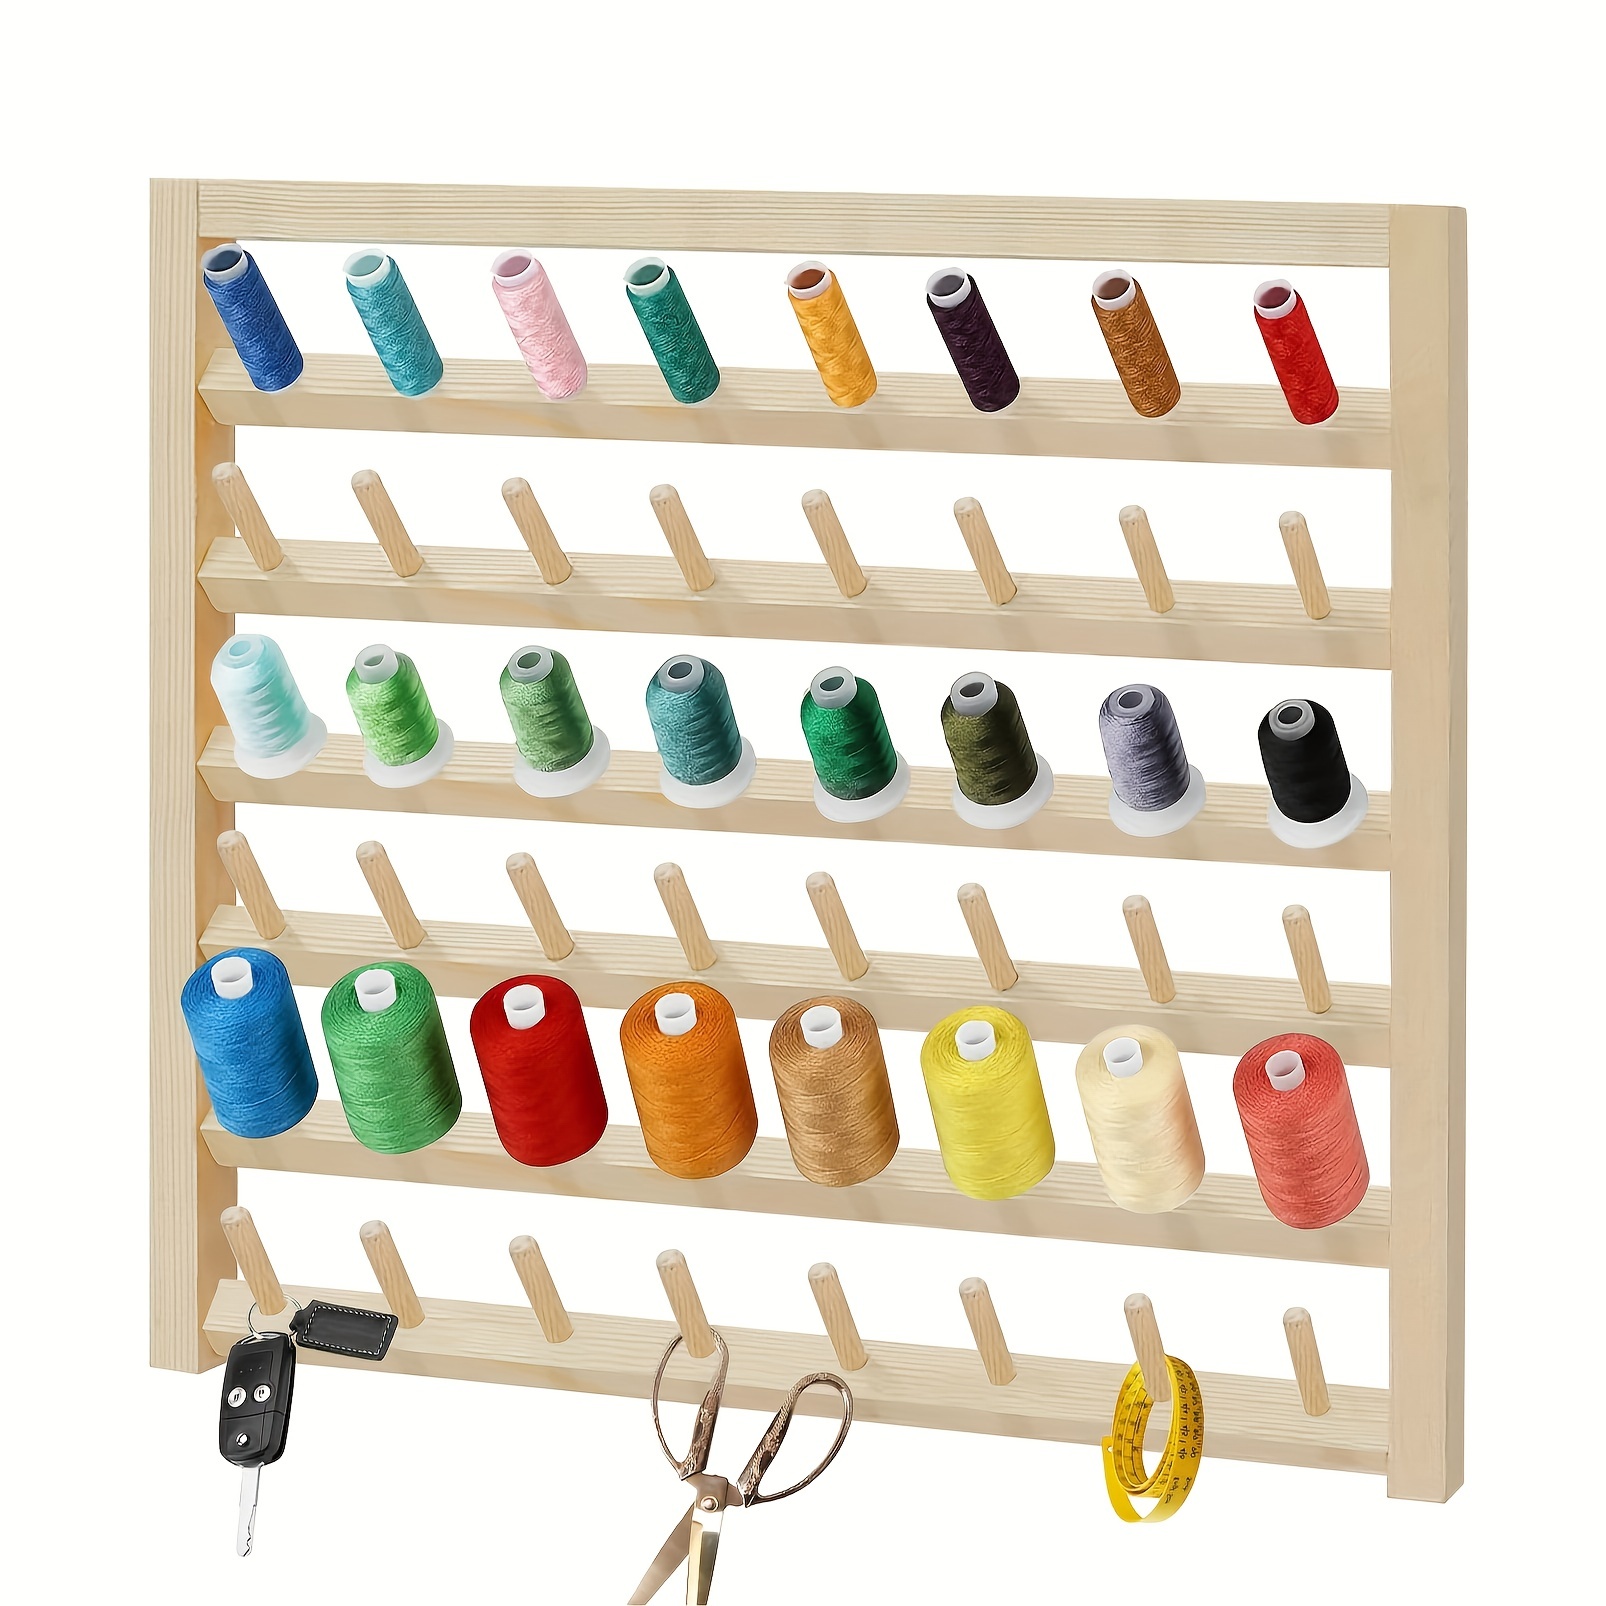 Wall Mounted 54-Spool Sewing Thread Rack Holder Wooden Organizer for  Embroidery